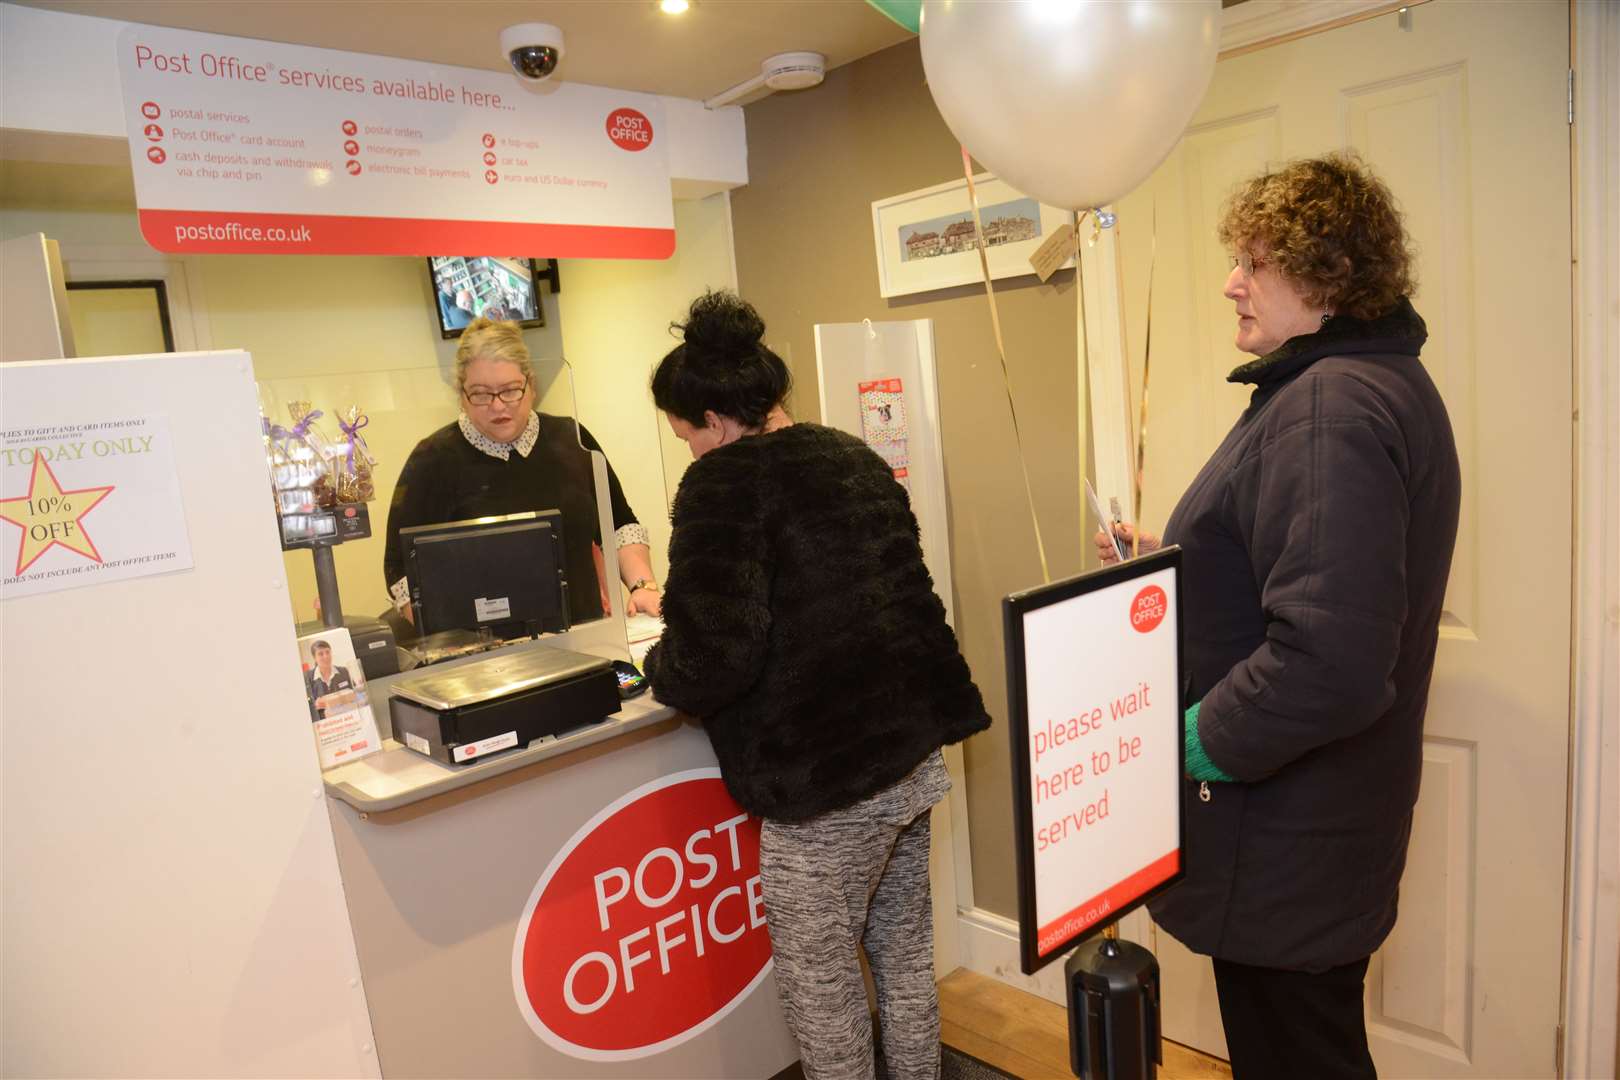 Inside the Post Office in 2017